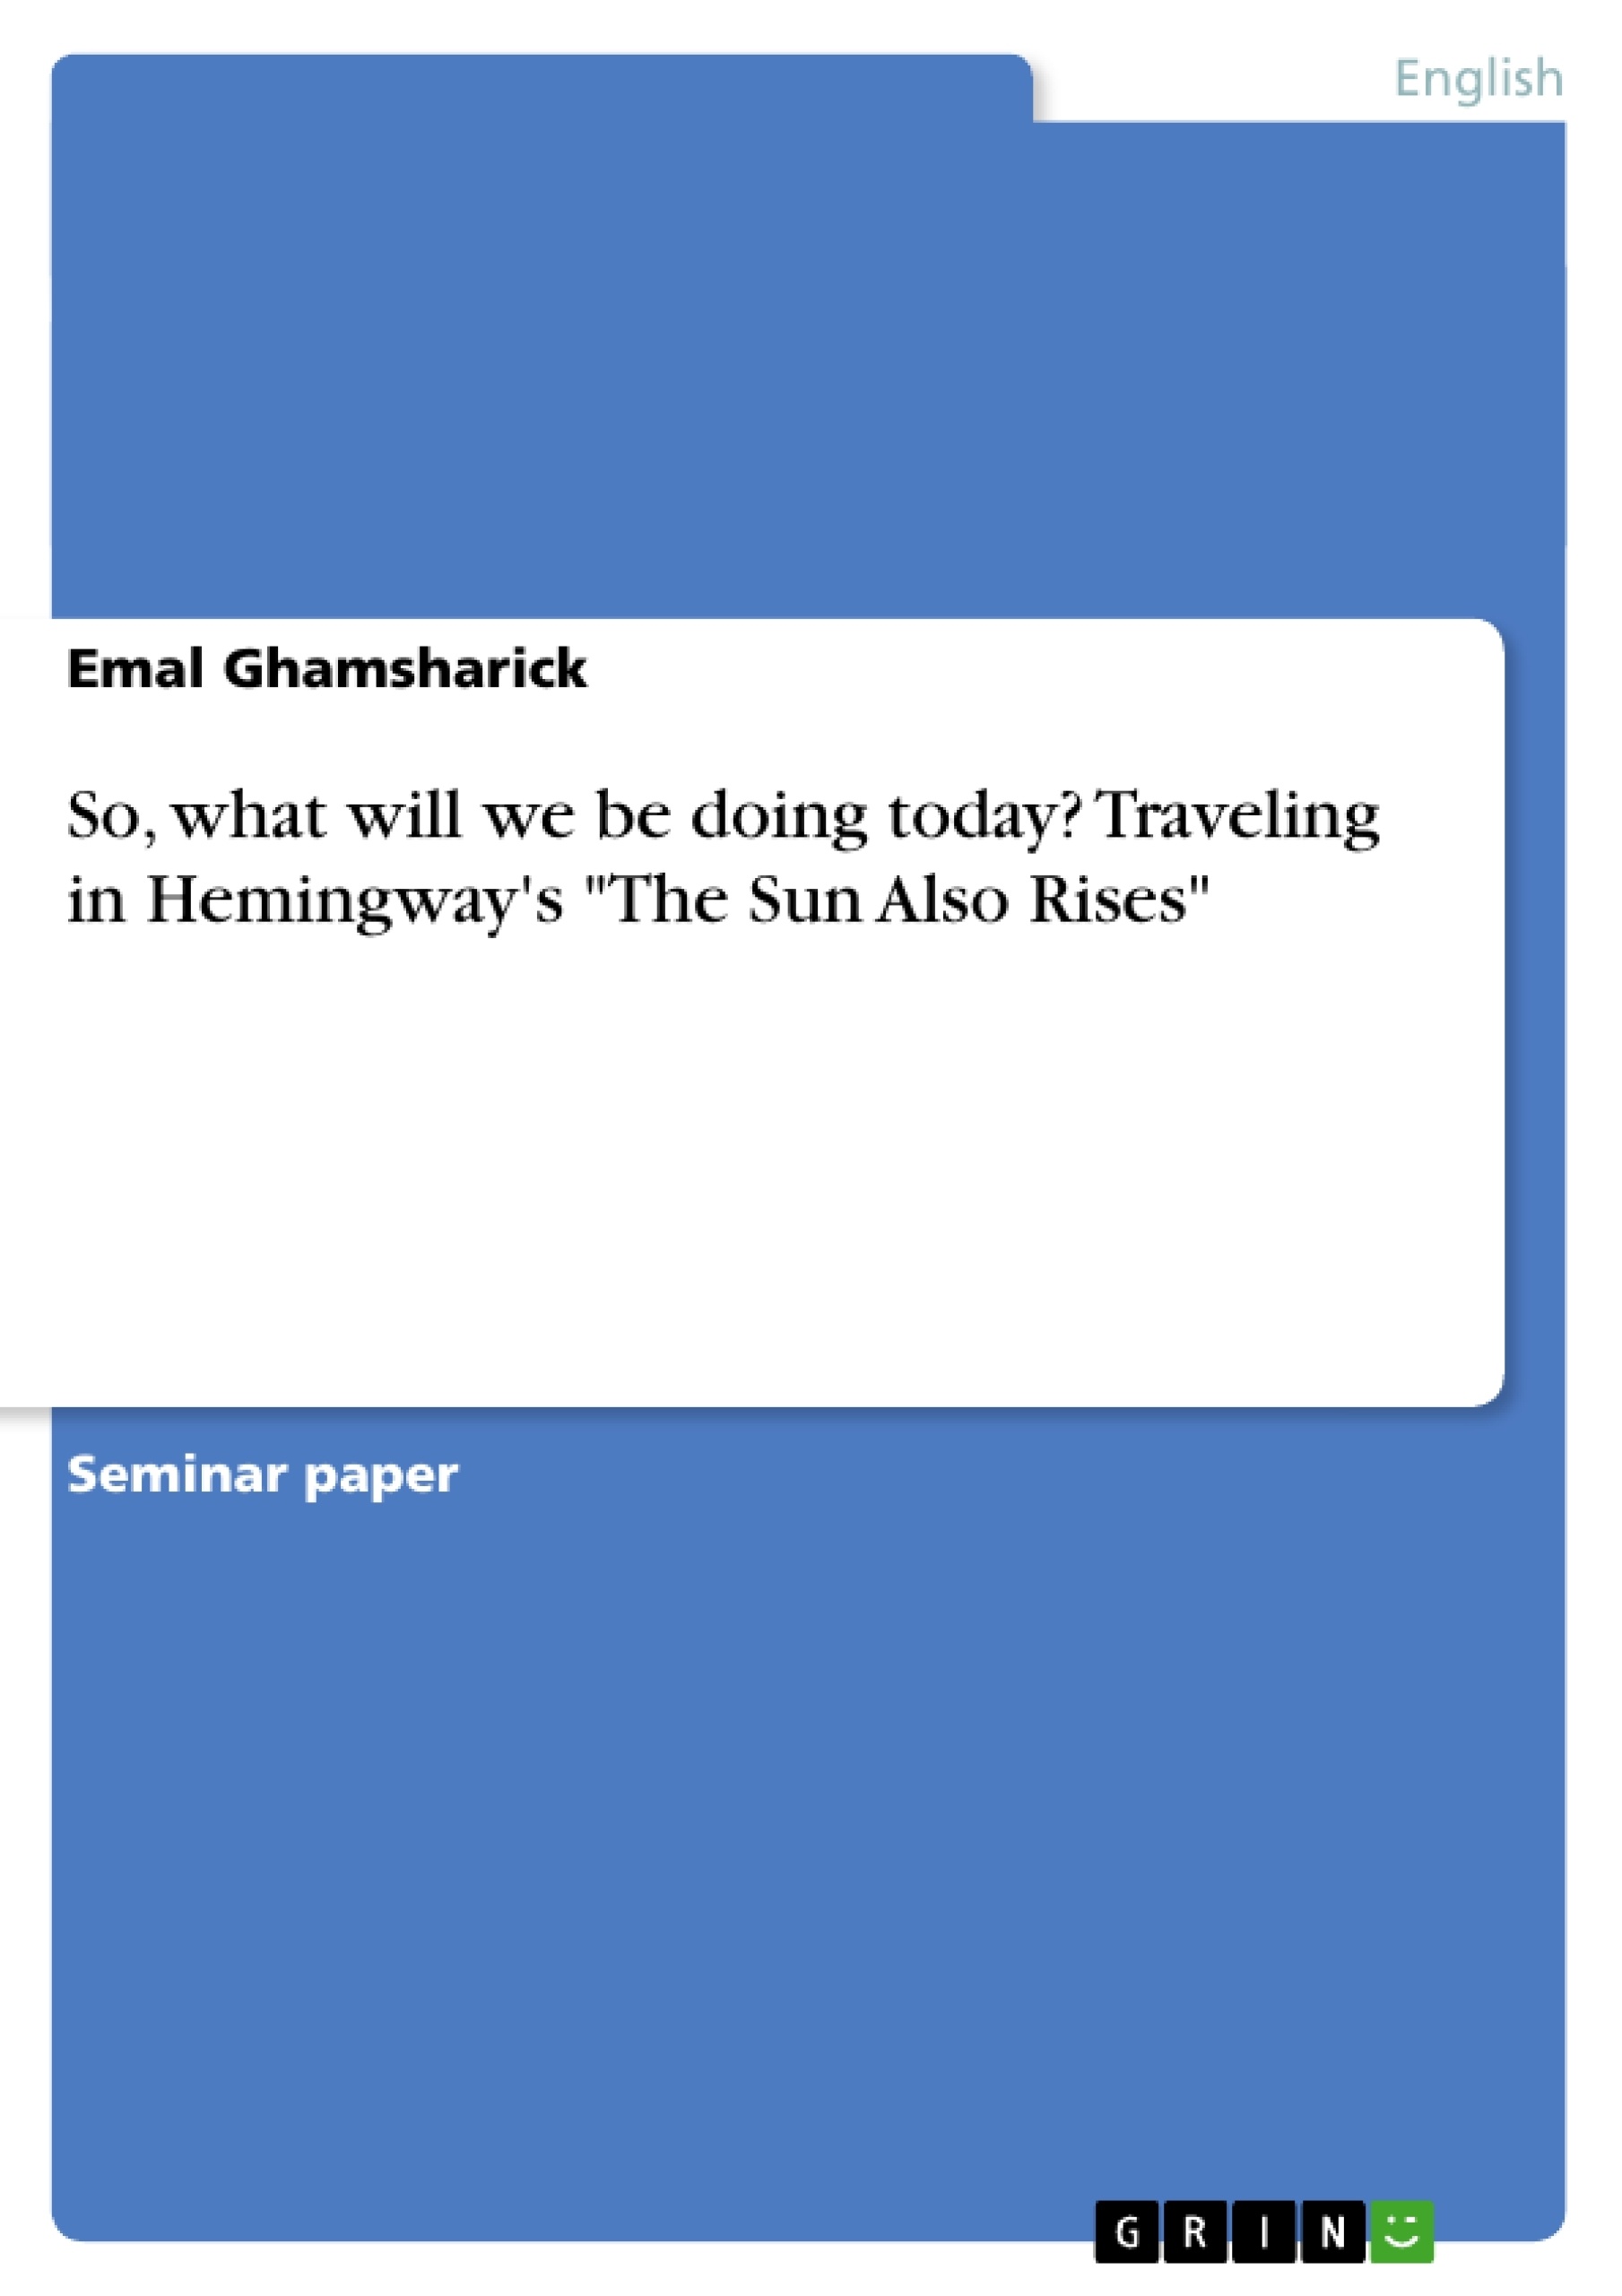 Titre: So, what will we be doing today? Traveling in Hemingway's "The Sun Also Rises"